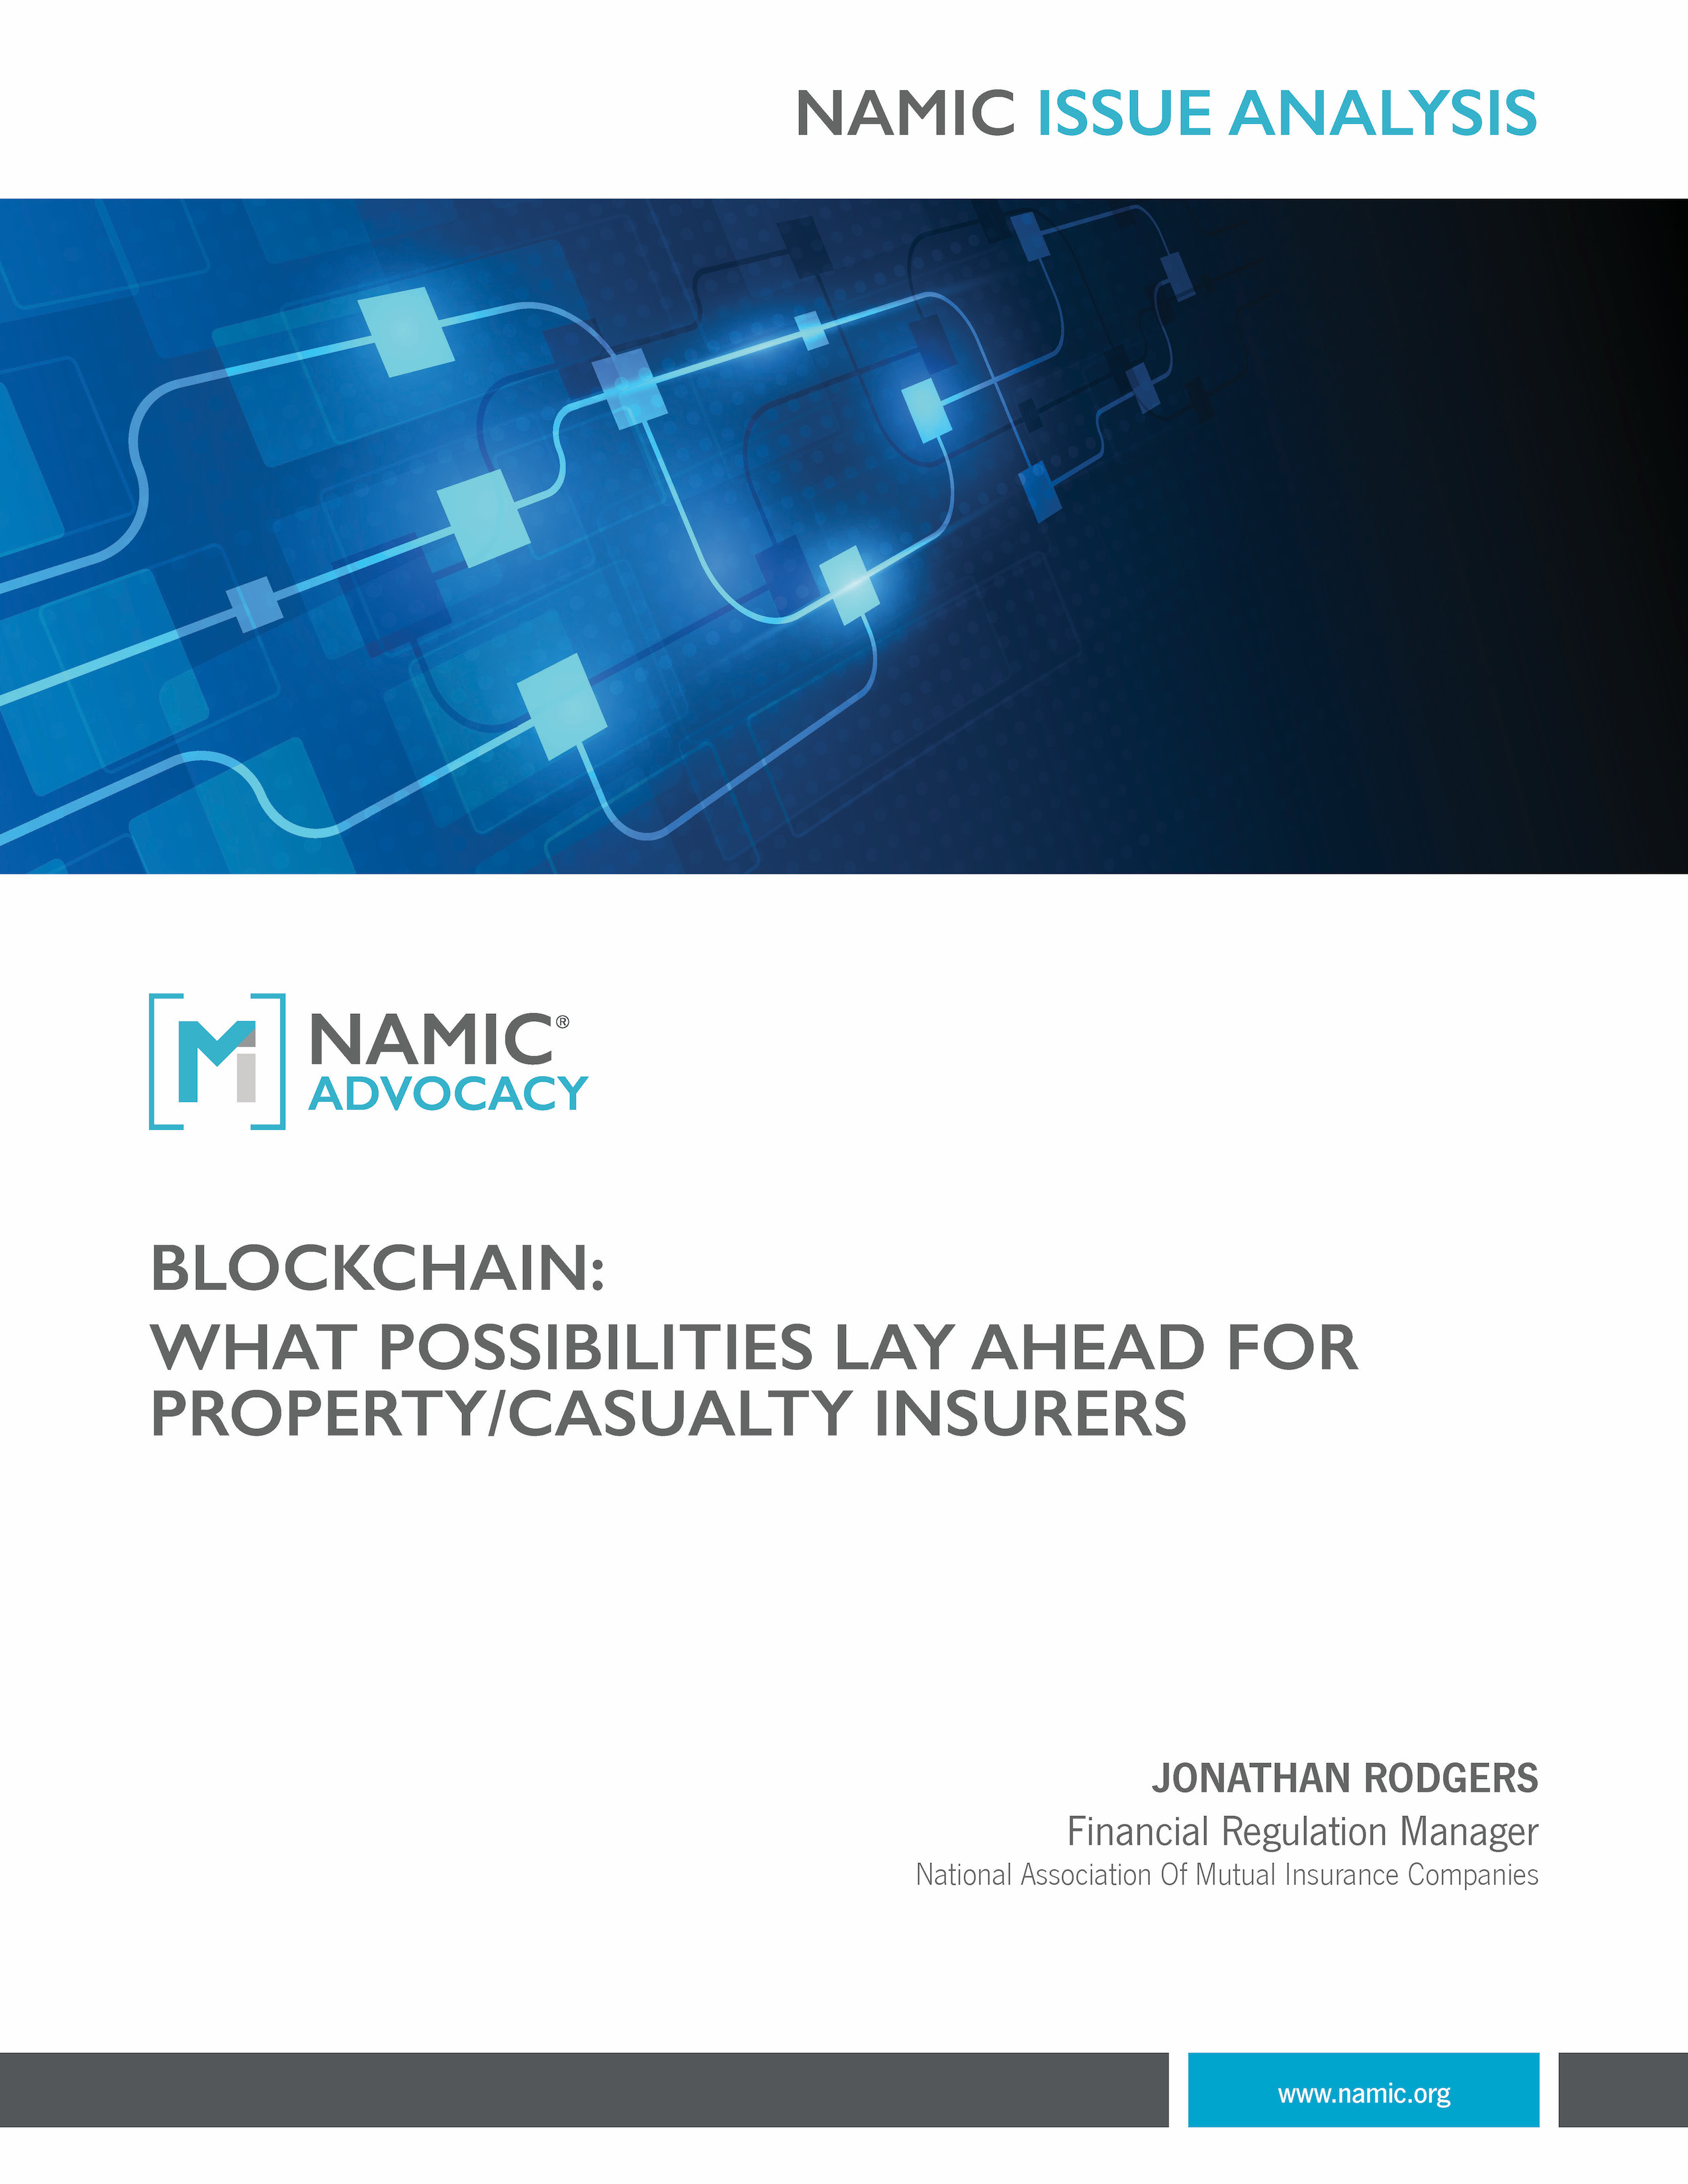  Blockchain: What Possibilities Lay Ahead for Property/Casualty Insurers PDF